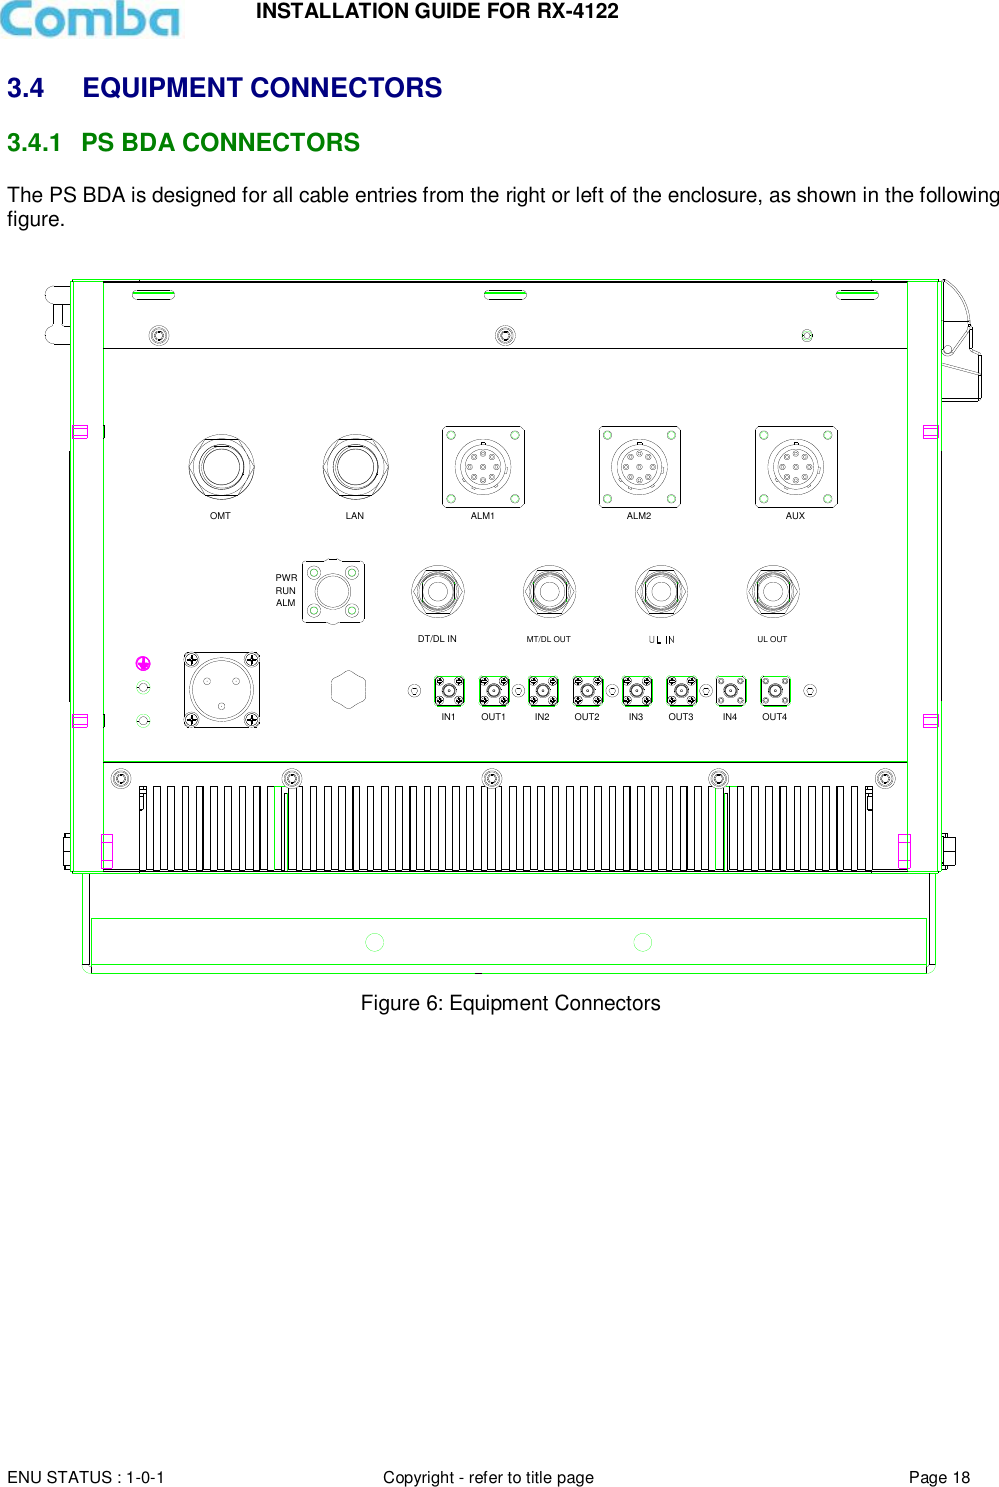 INSTALLATION GUIDE FOR RX-4122  ENU STATUS : 1-0-1 Copyright - refer to title page Page 18     3.4 EQUIPMENT CONNECTORS 3.4.1  PS BDA CONNECTORS The PS BDA is designed for all cable entries from the right or left of the enclosure, as shown in the following figure.   OMT LAN ALM1 ALM2 AUXRUNPWRALMDT/DL IN MT/DL OUT UL OUTIN1 OUT1 IN2 OUT2 IN3 OUT3 IN4 OUT4 Figure 6: Equipment Connectors               